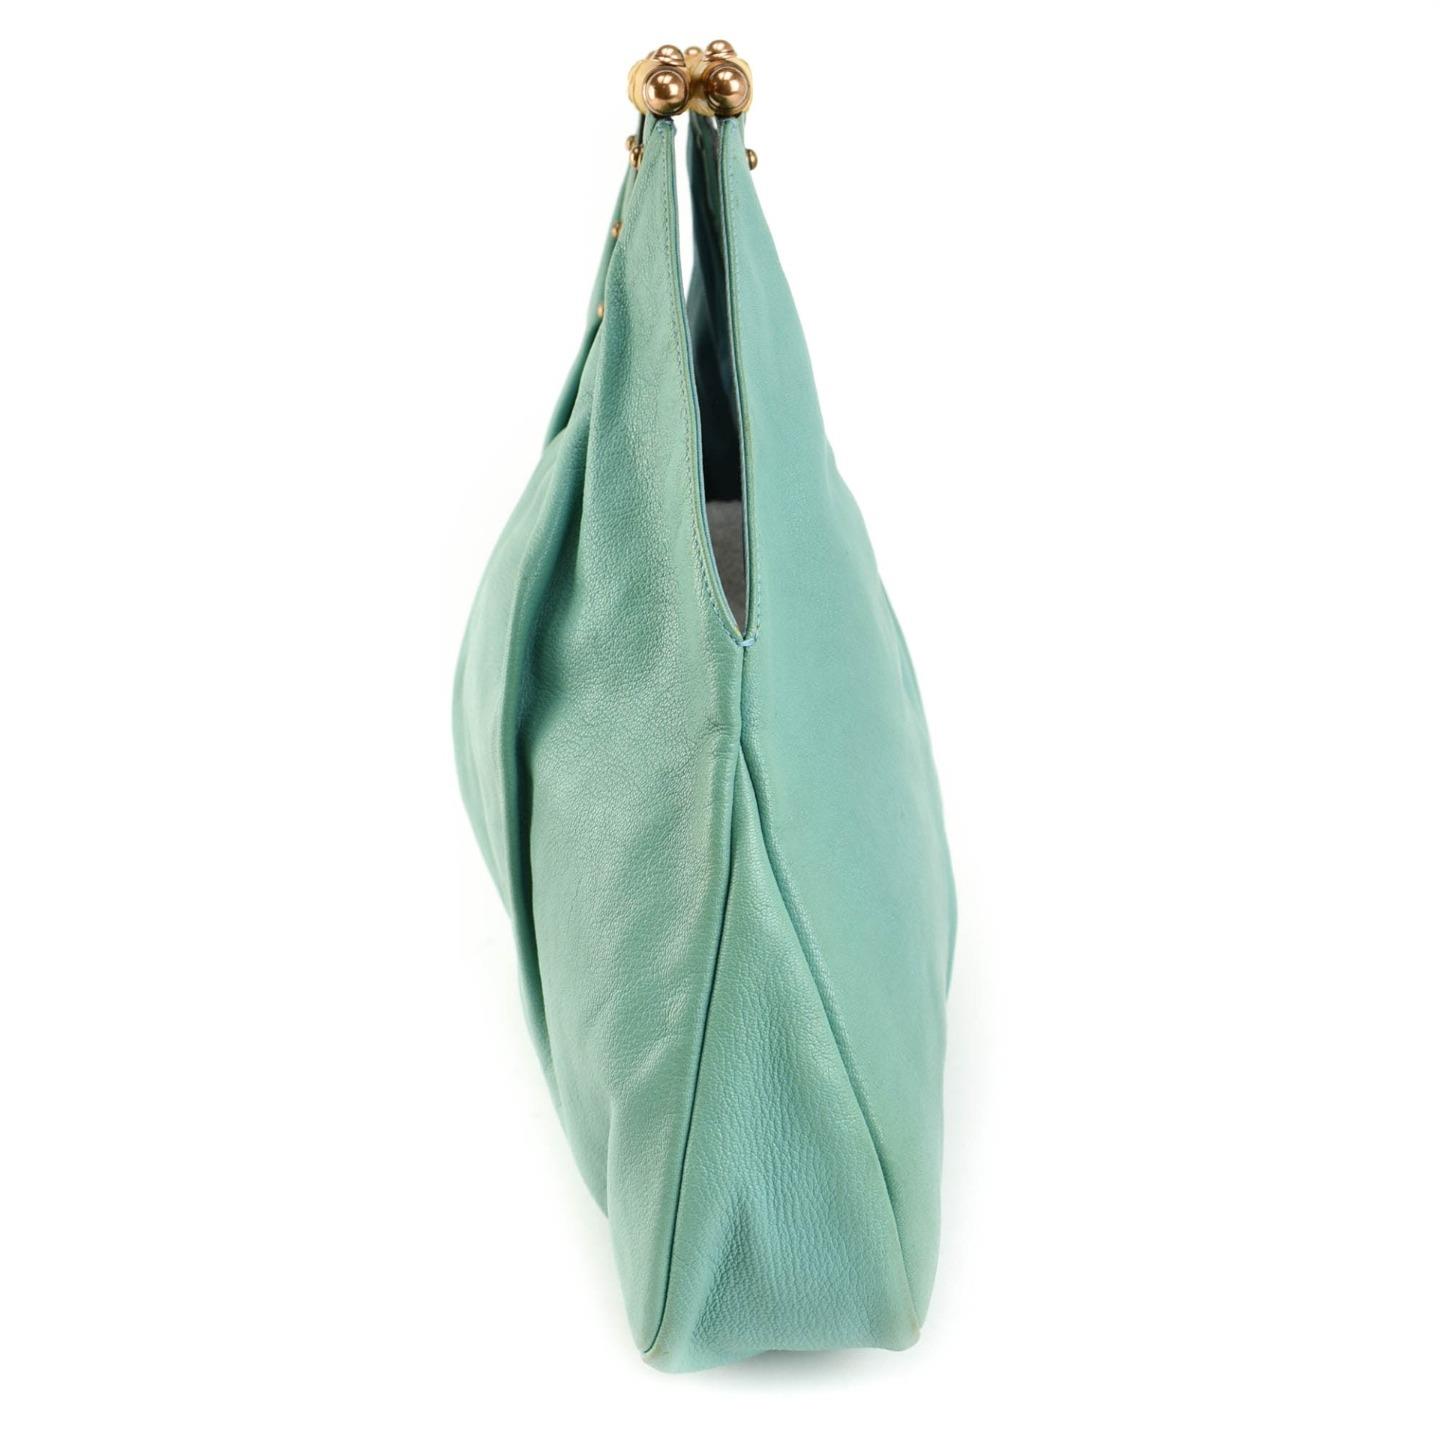 GUCCI: Teal Blue, Leather & Signature Bamboo Large Hobo Bag (sw) | eBay